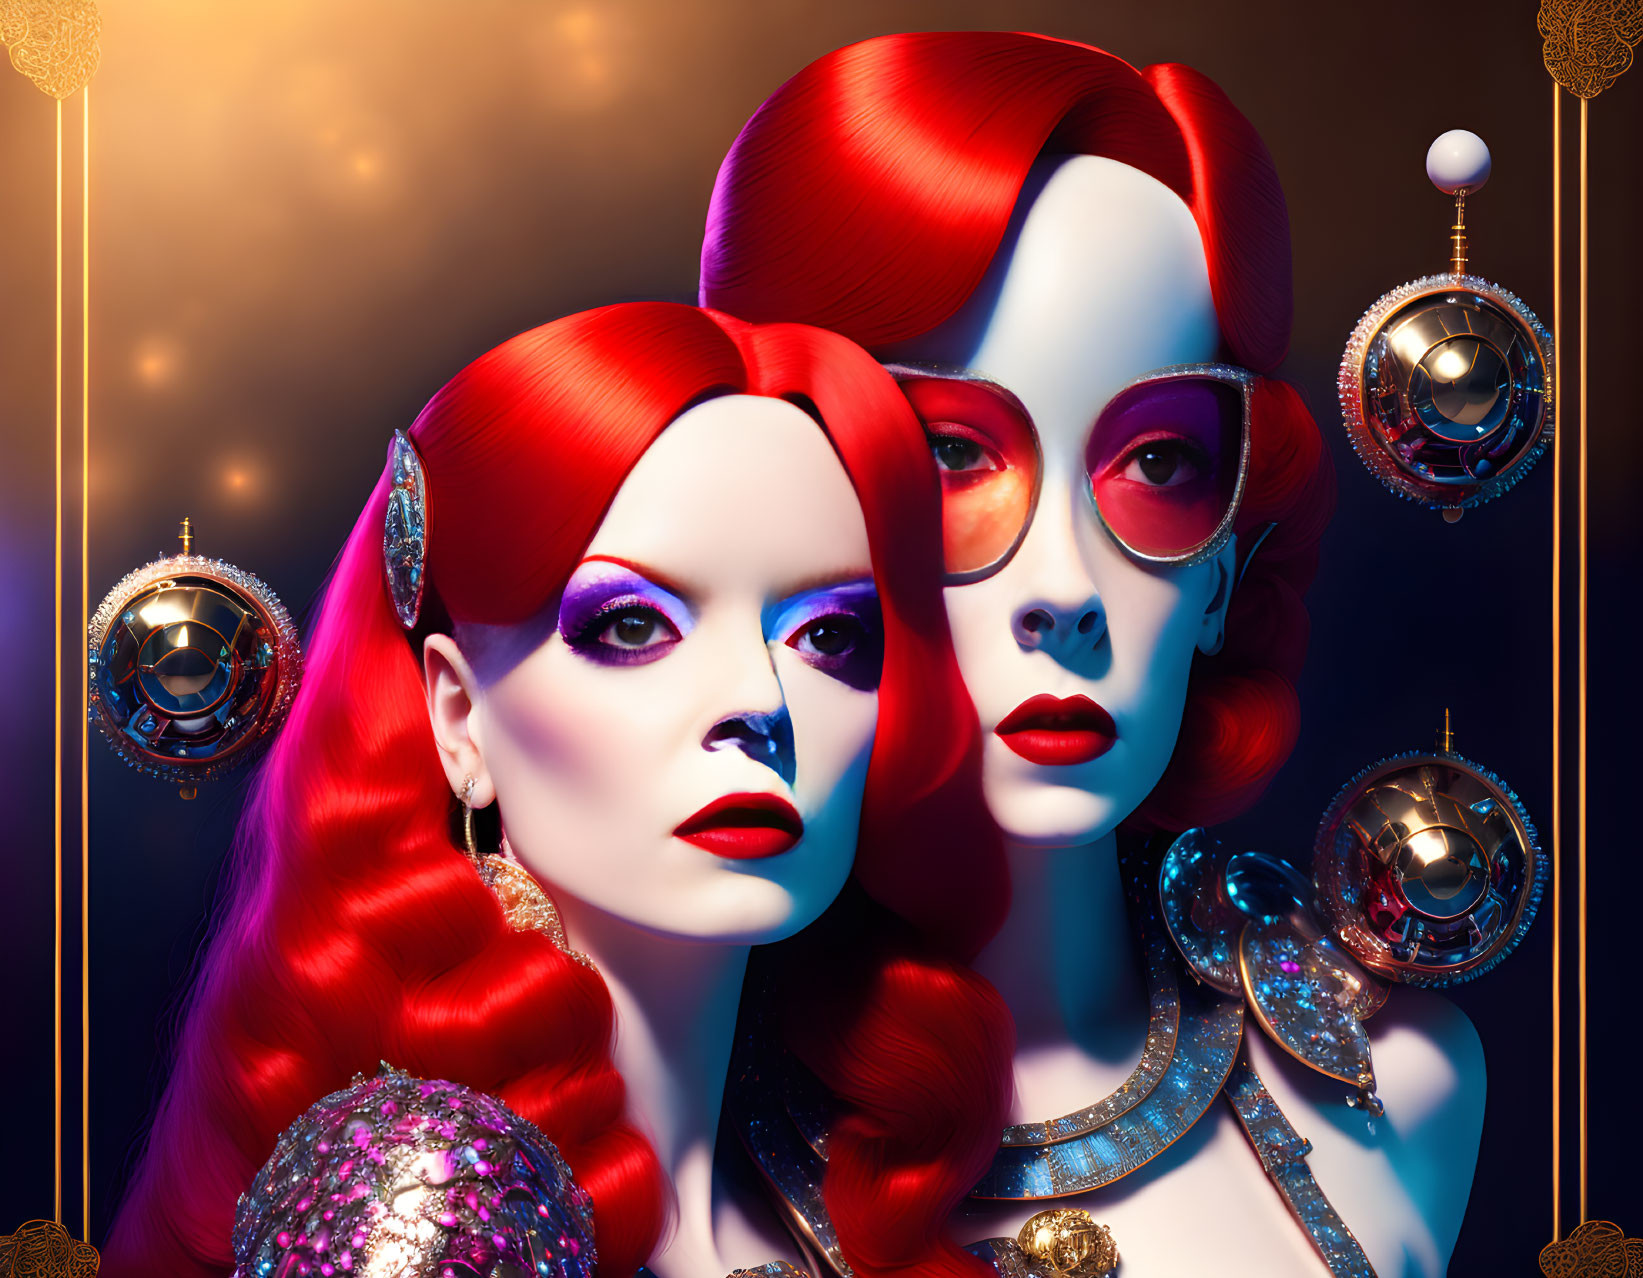 Stylized red-haired female figures with sunglasses and ornate accessories on dark background